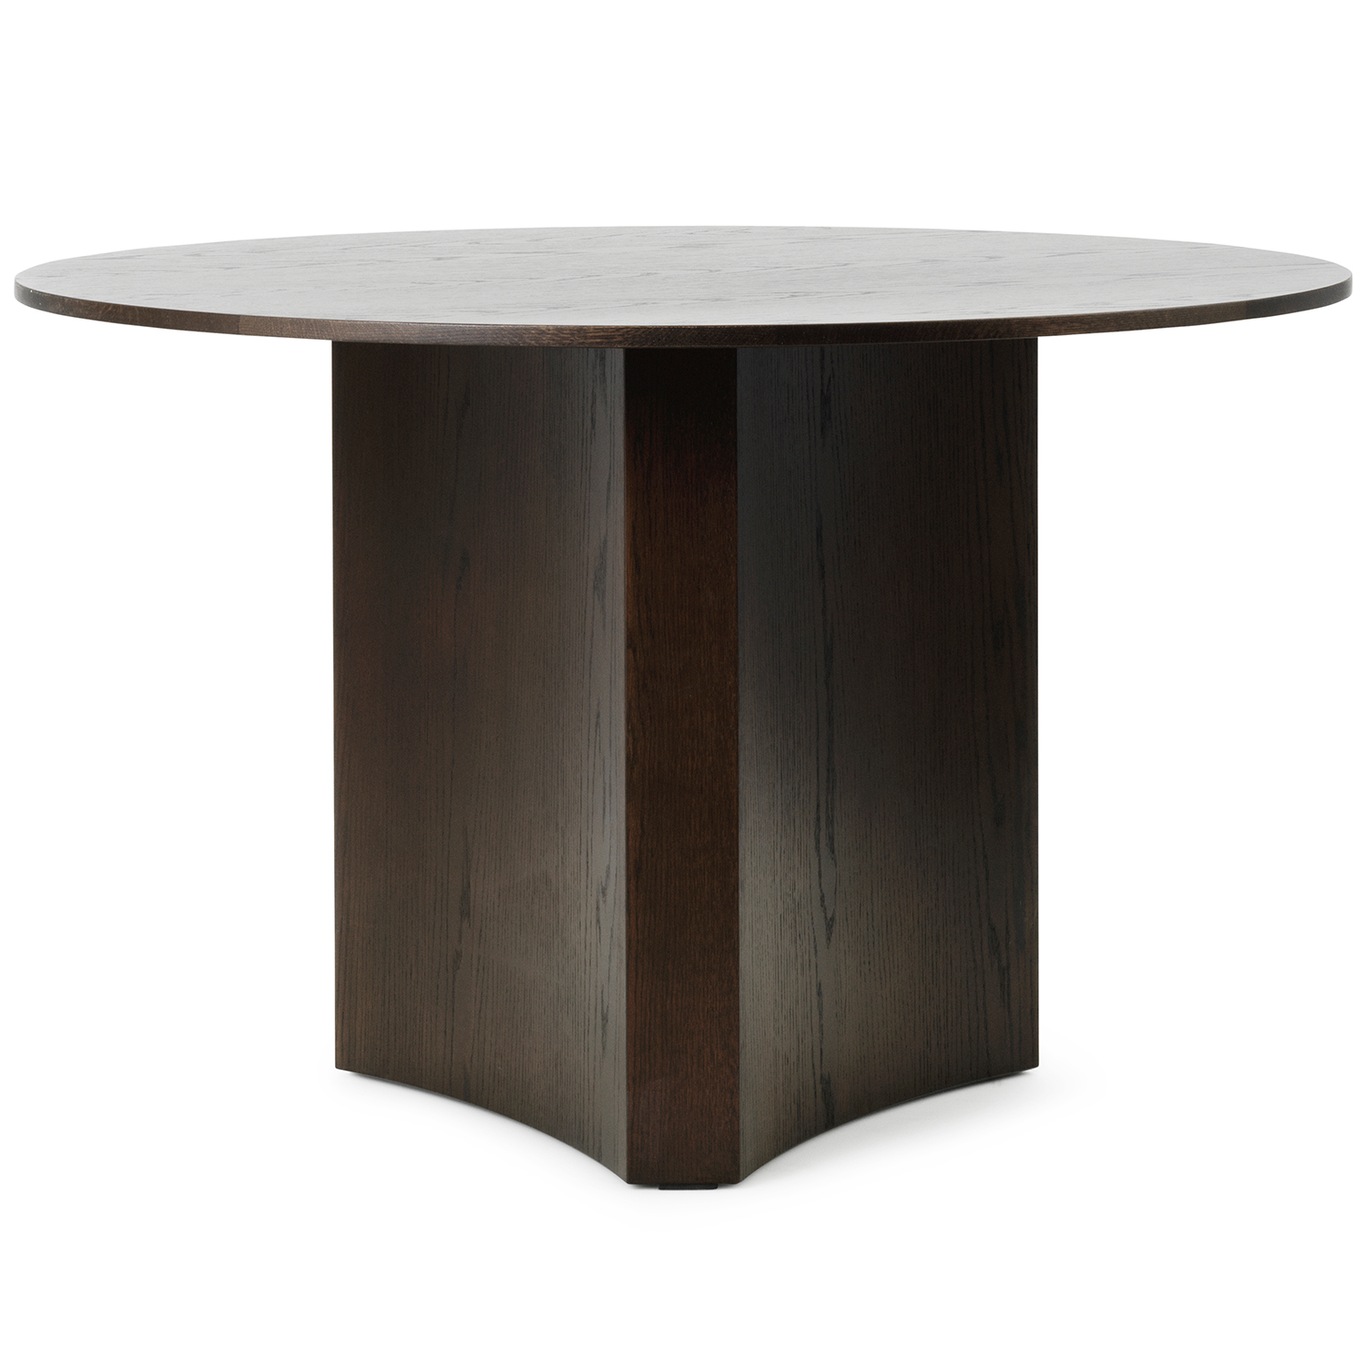 Bue Dining Table Ø120 cm, Dark Stained Oak